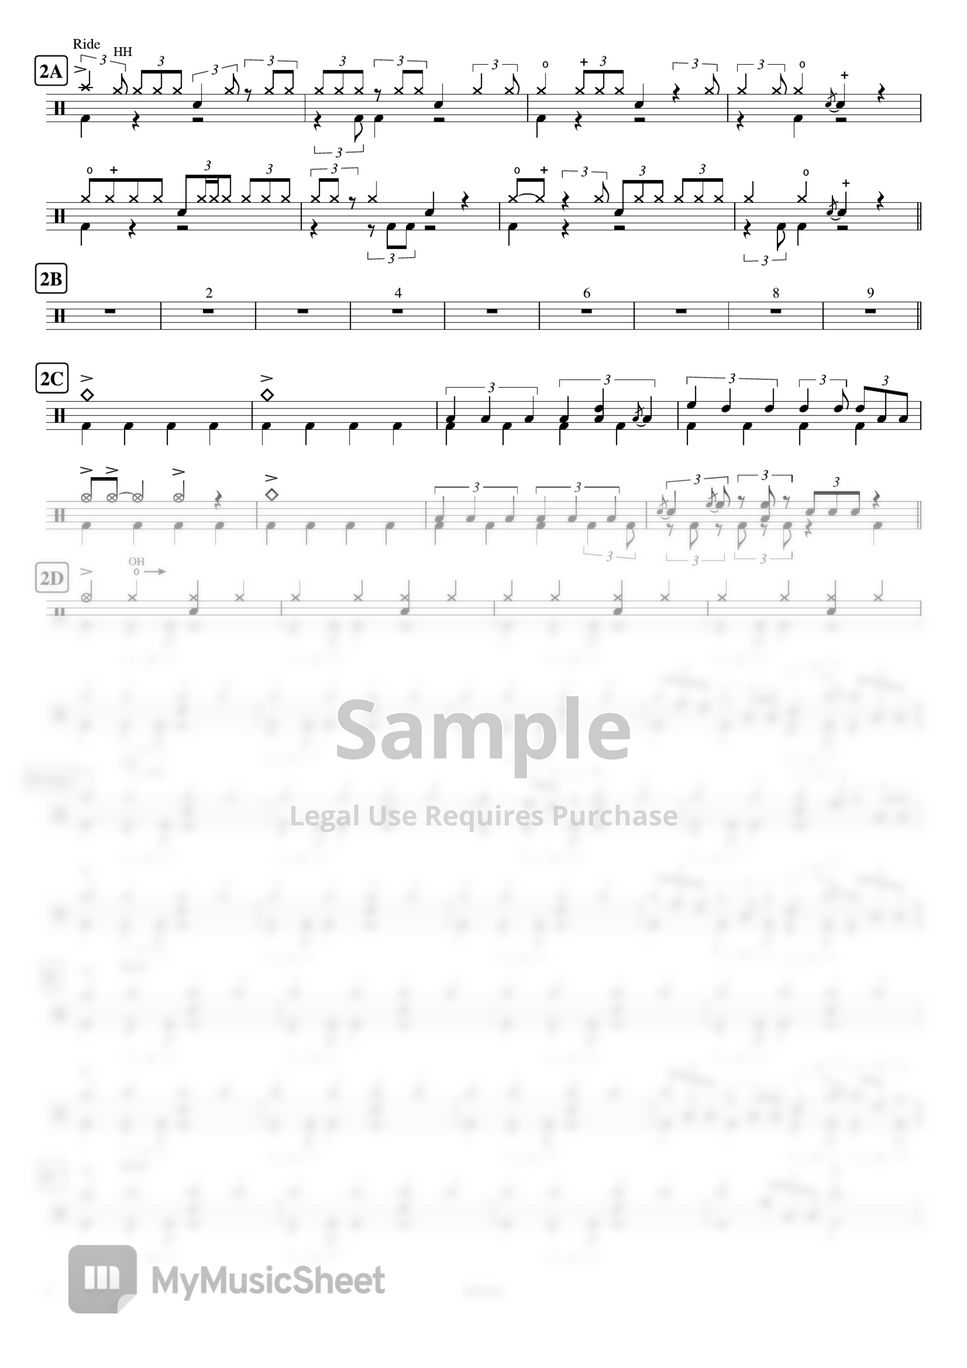 Official髭男dism - Subtitle (TVドラマ「silent」主題歌) by Cookai's J-pop Drum sheet music!!!